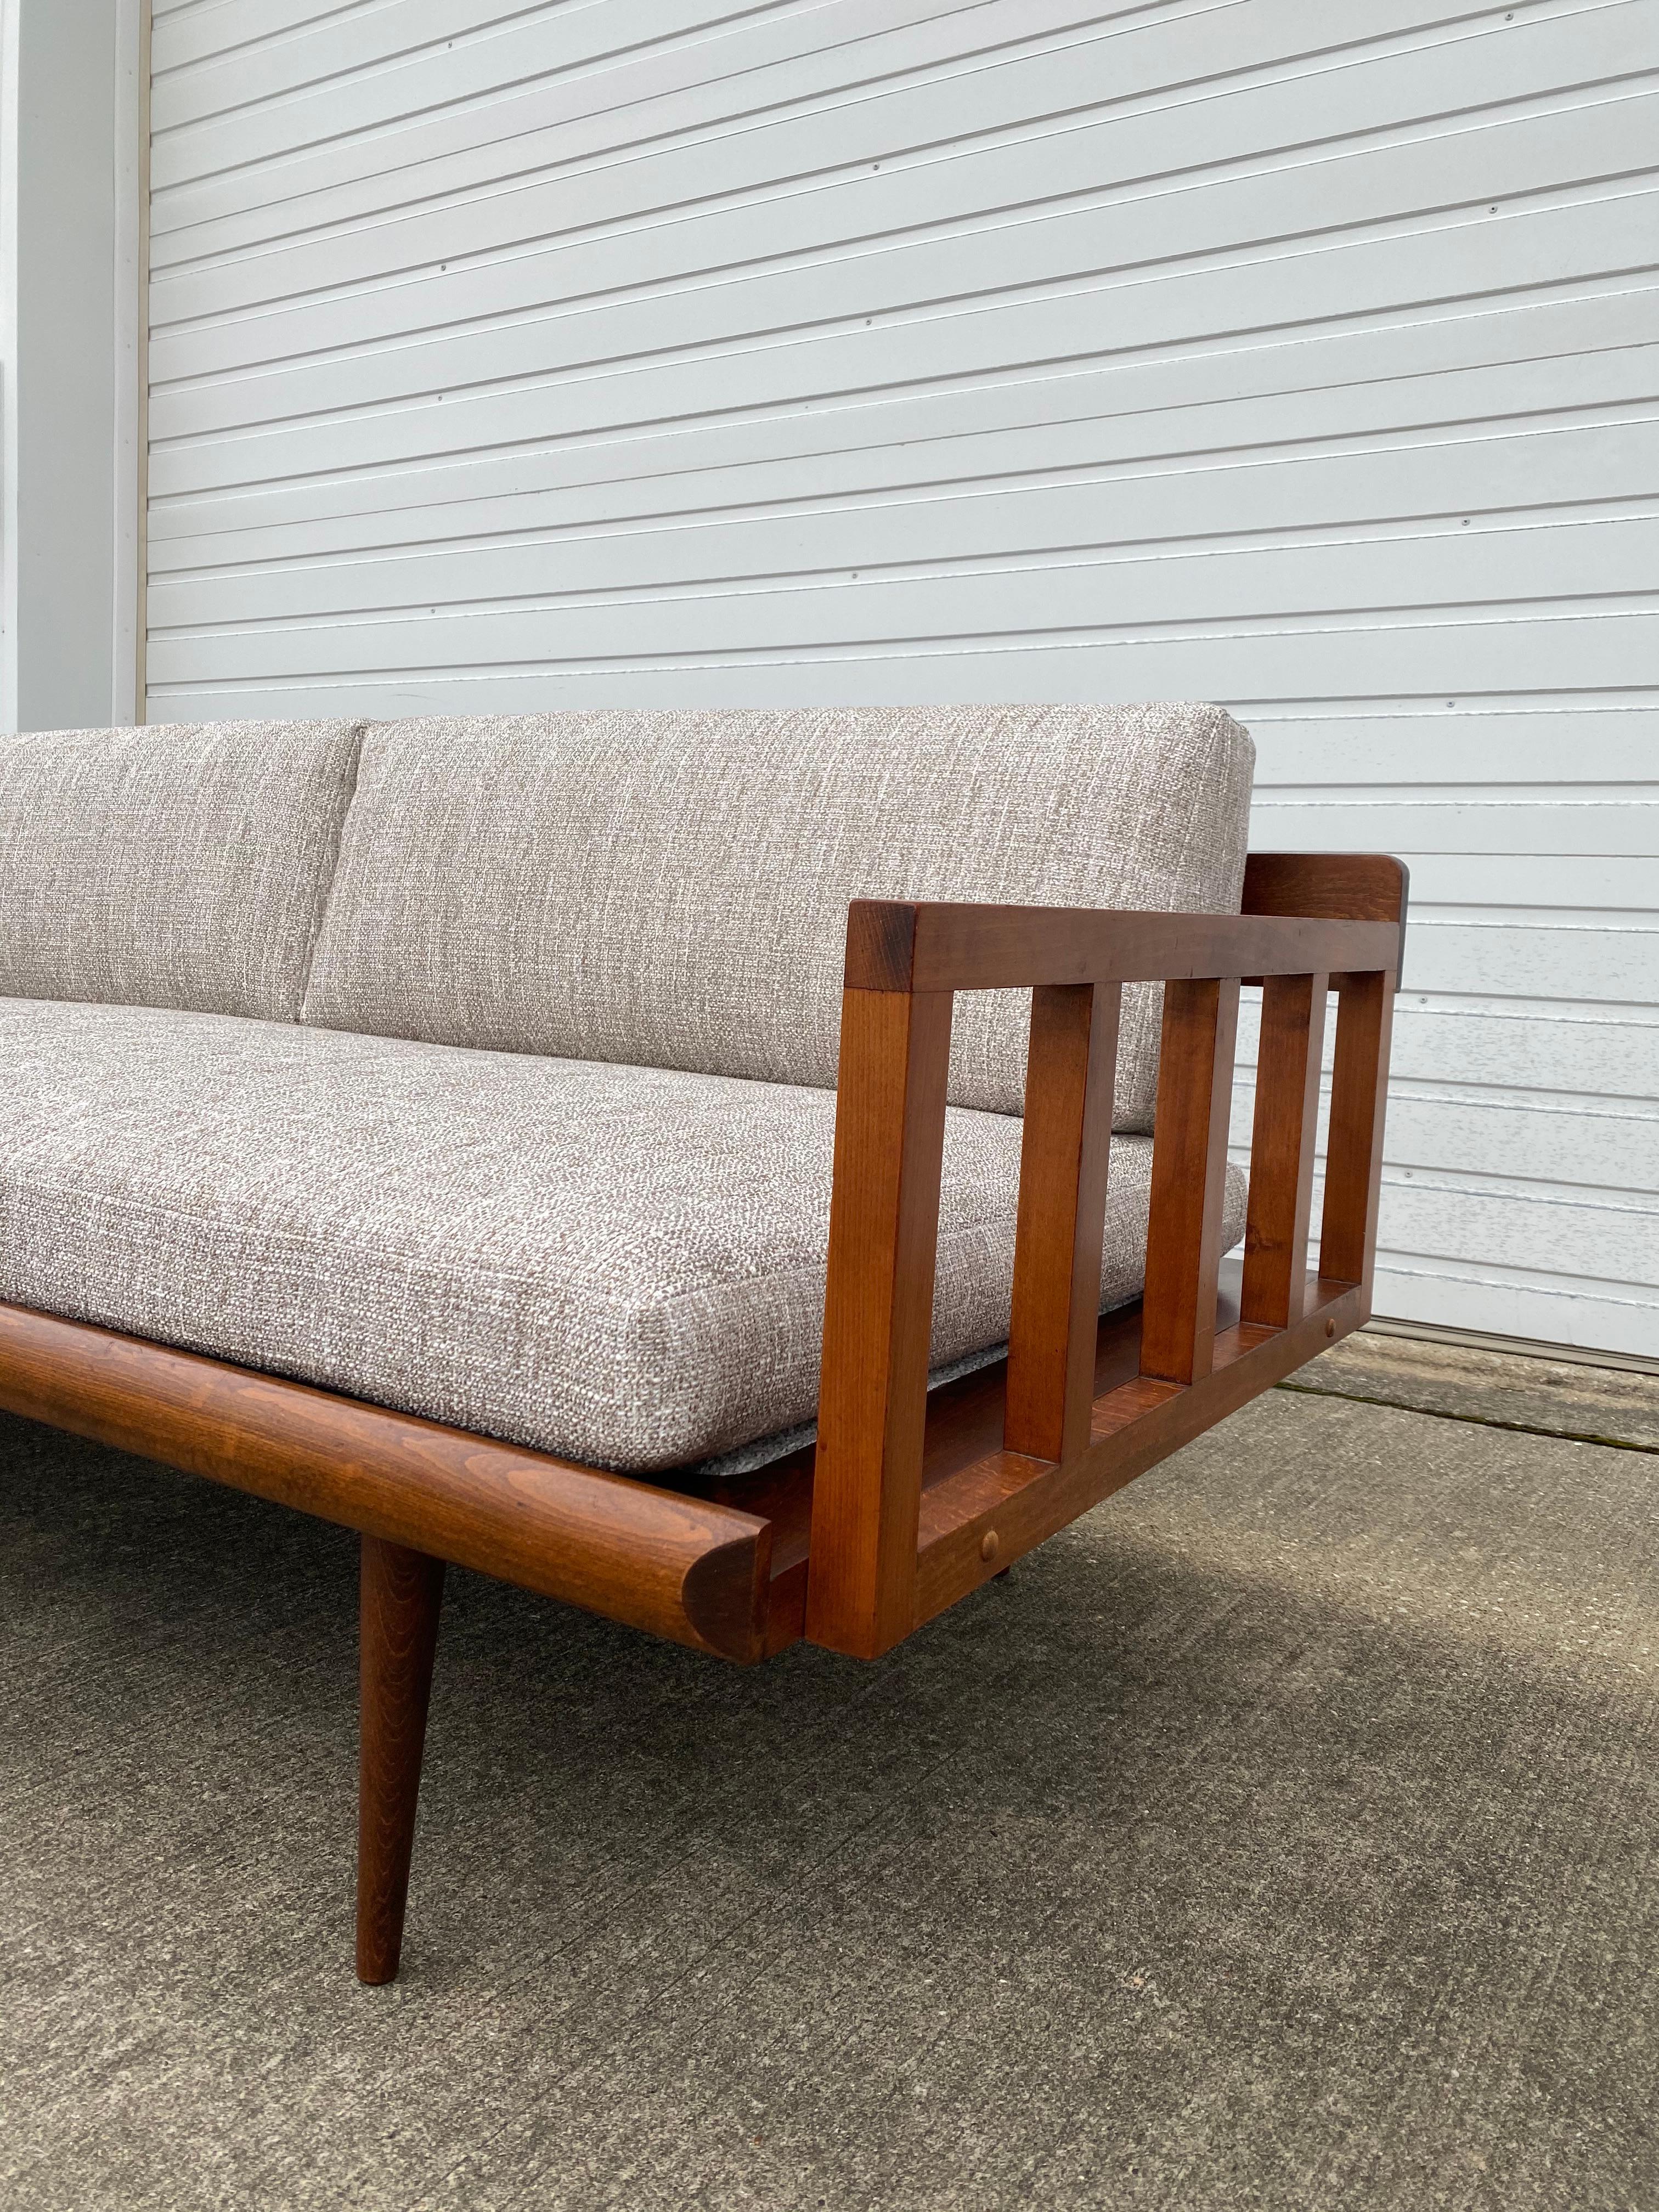 Late 20th Century Reupholstered Yugoslavian Mid-century Modern Teak Daybed For Sale